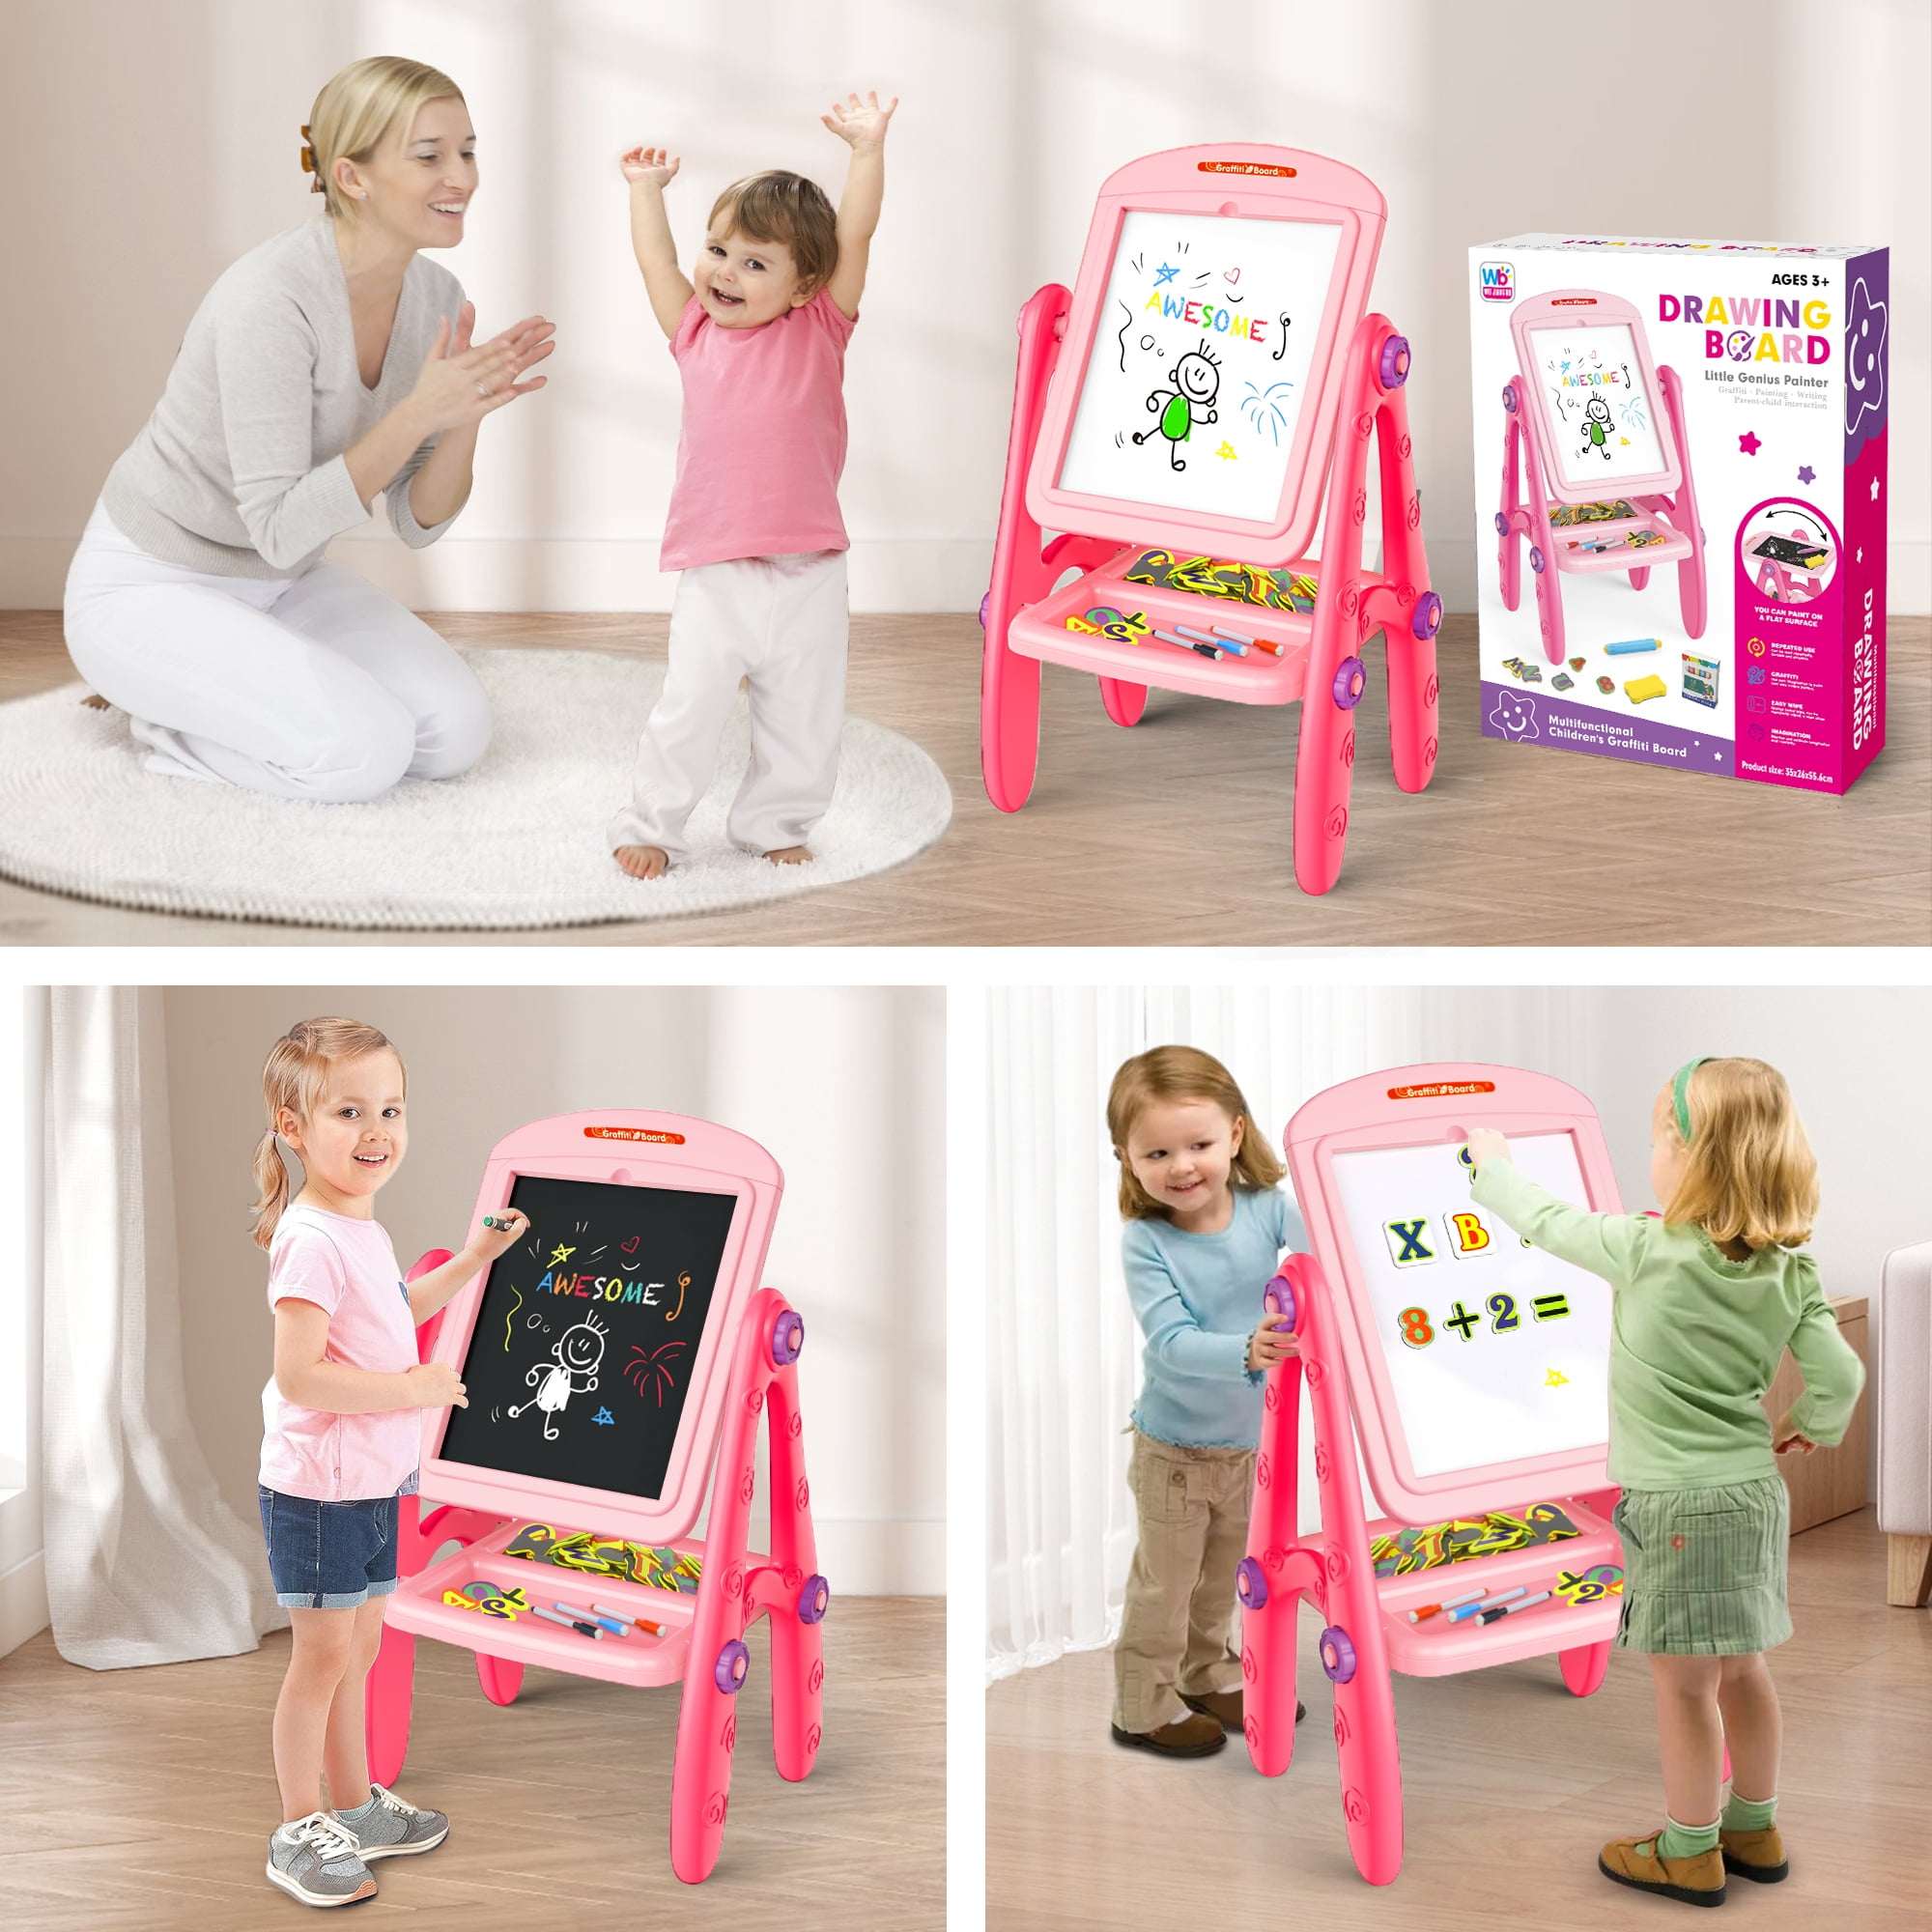 Colorful Magnetic Draw Board Fun Enfant Graffiti Toy For Kids Double Face  Tableau Perfect Teacher Christmas Gifts From Toybabykids83, $18.77